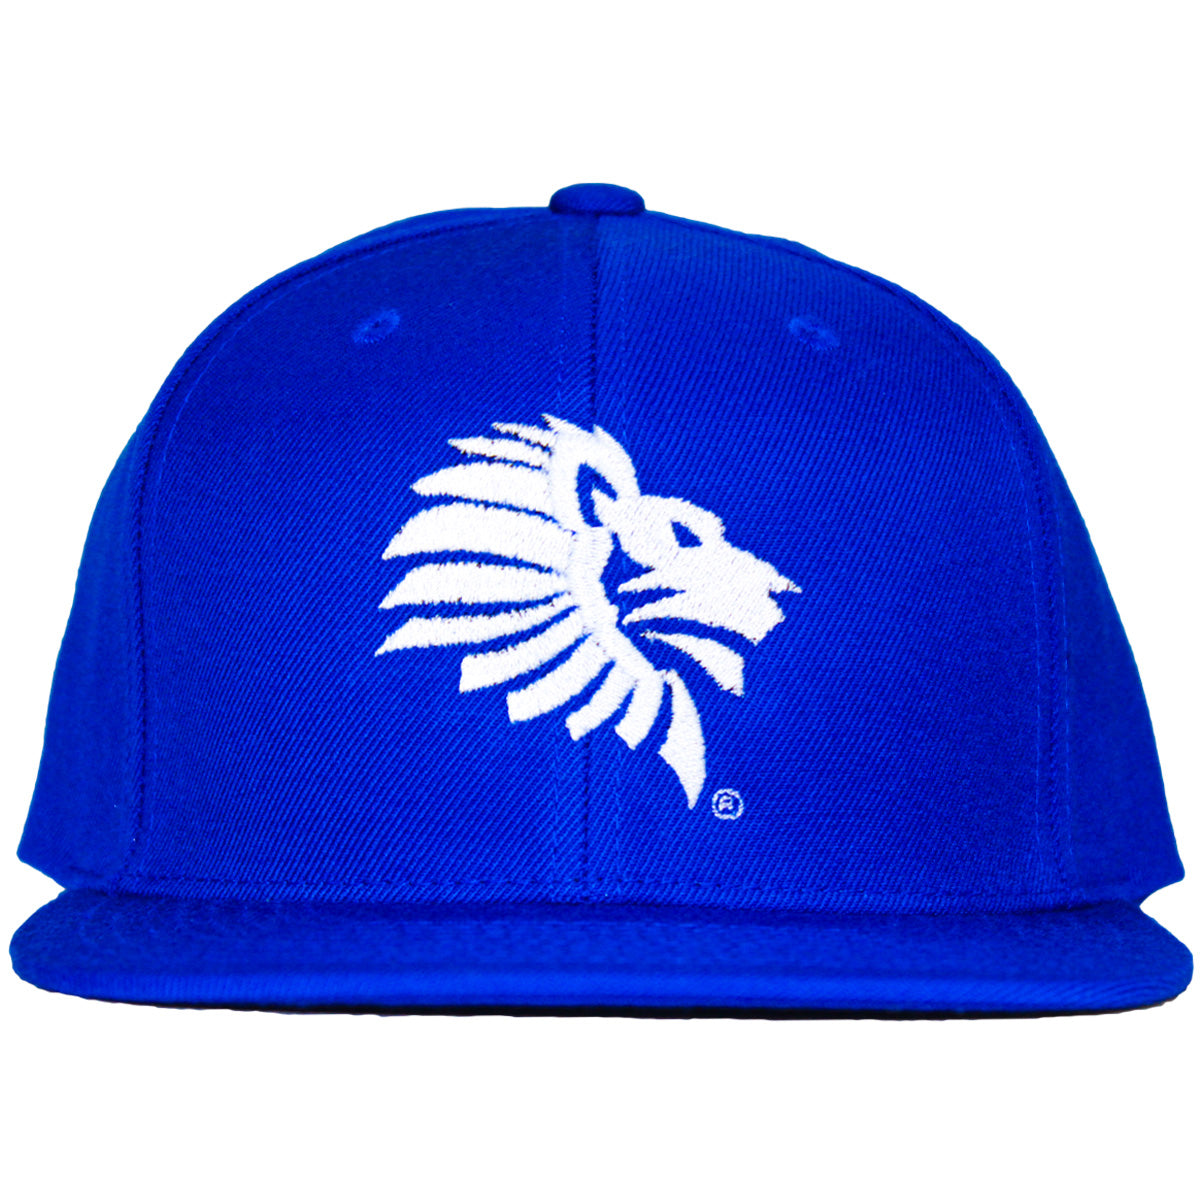 Front View - LHU Heritage Logo Snapback in Royal